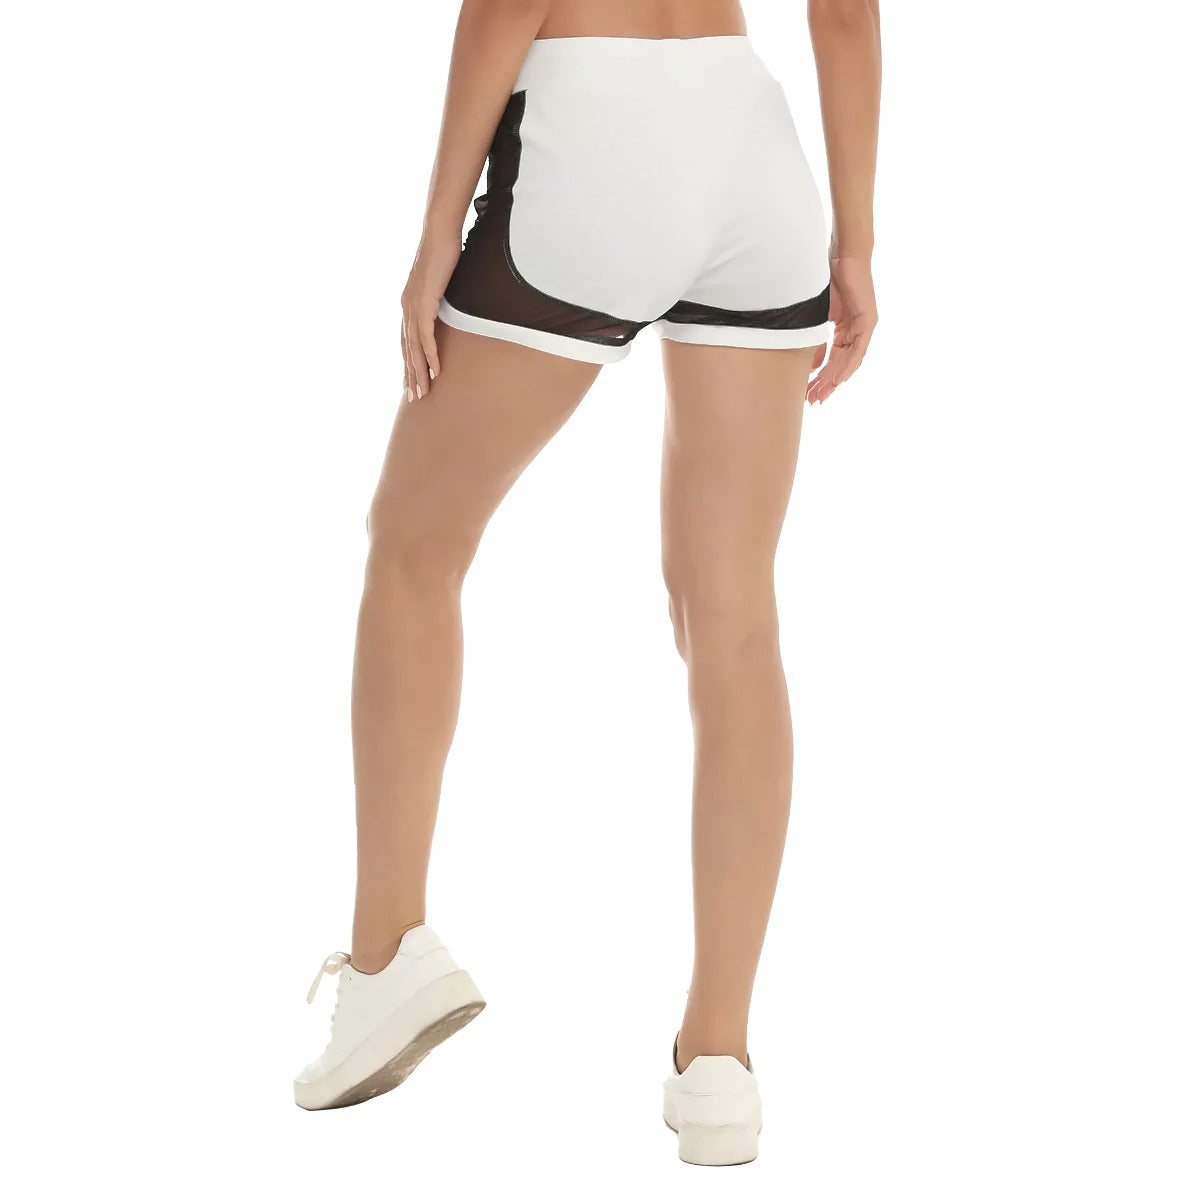 Teen Yoga Shorts - Youth Sport for Ladies Yoga and Meditation Products - Personal Hour